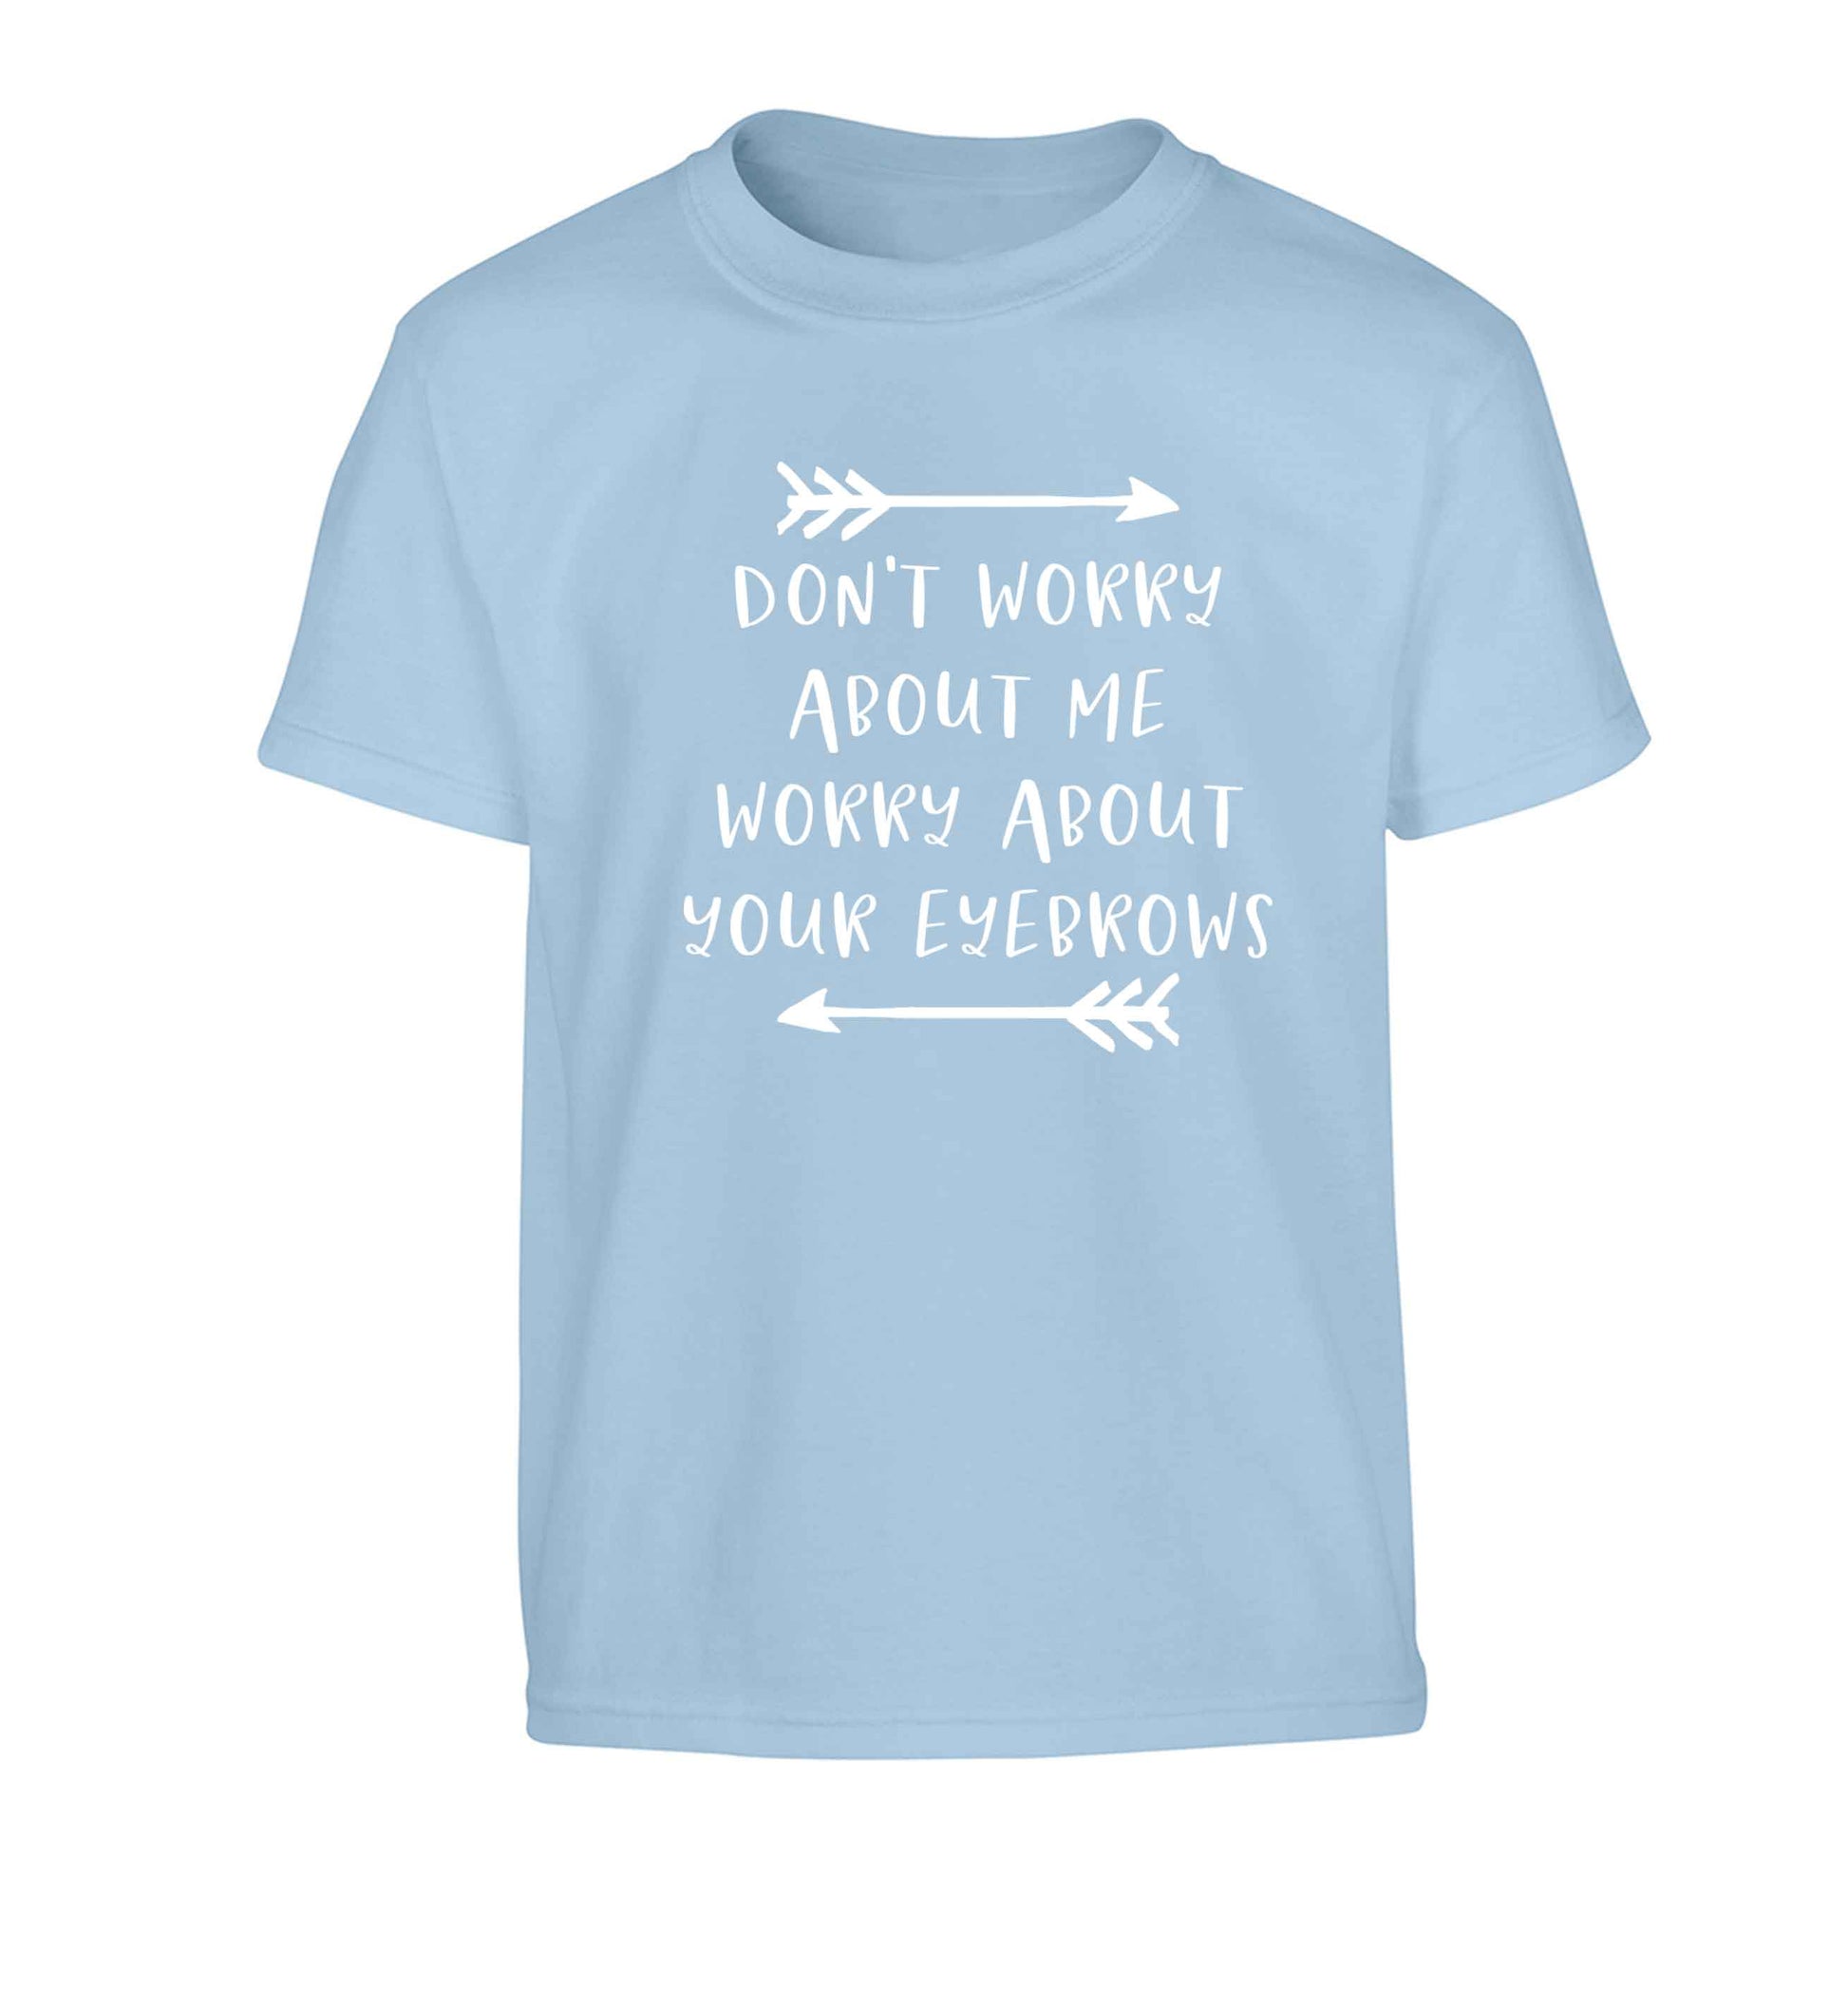 Don't worry about me worry about your eyebrows Children's light blue Tshirt 12-13 Years